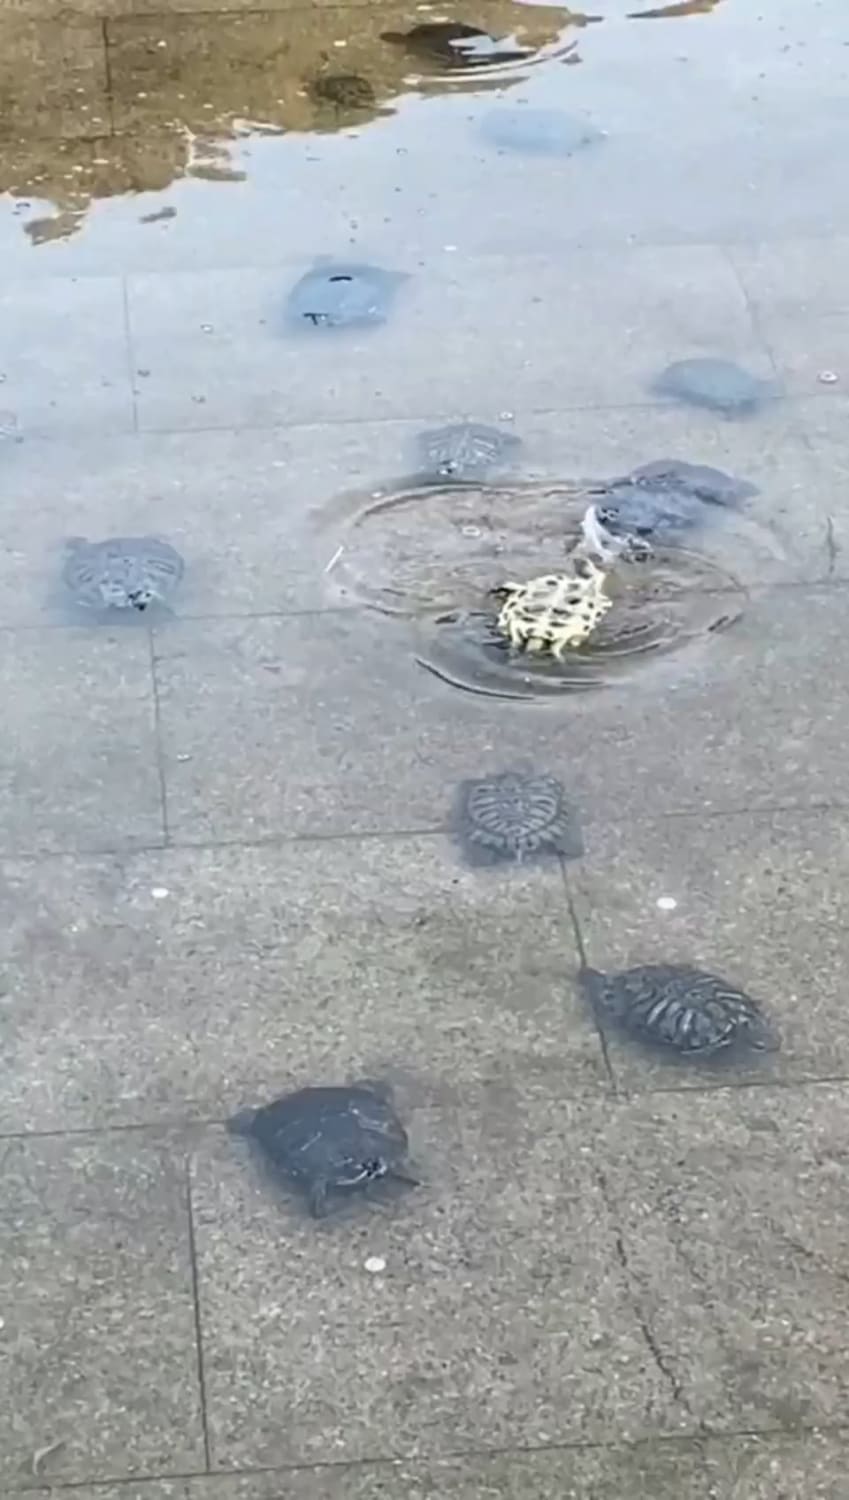 A social bond seems to compel these turtles to help the one in need